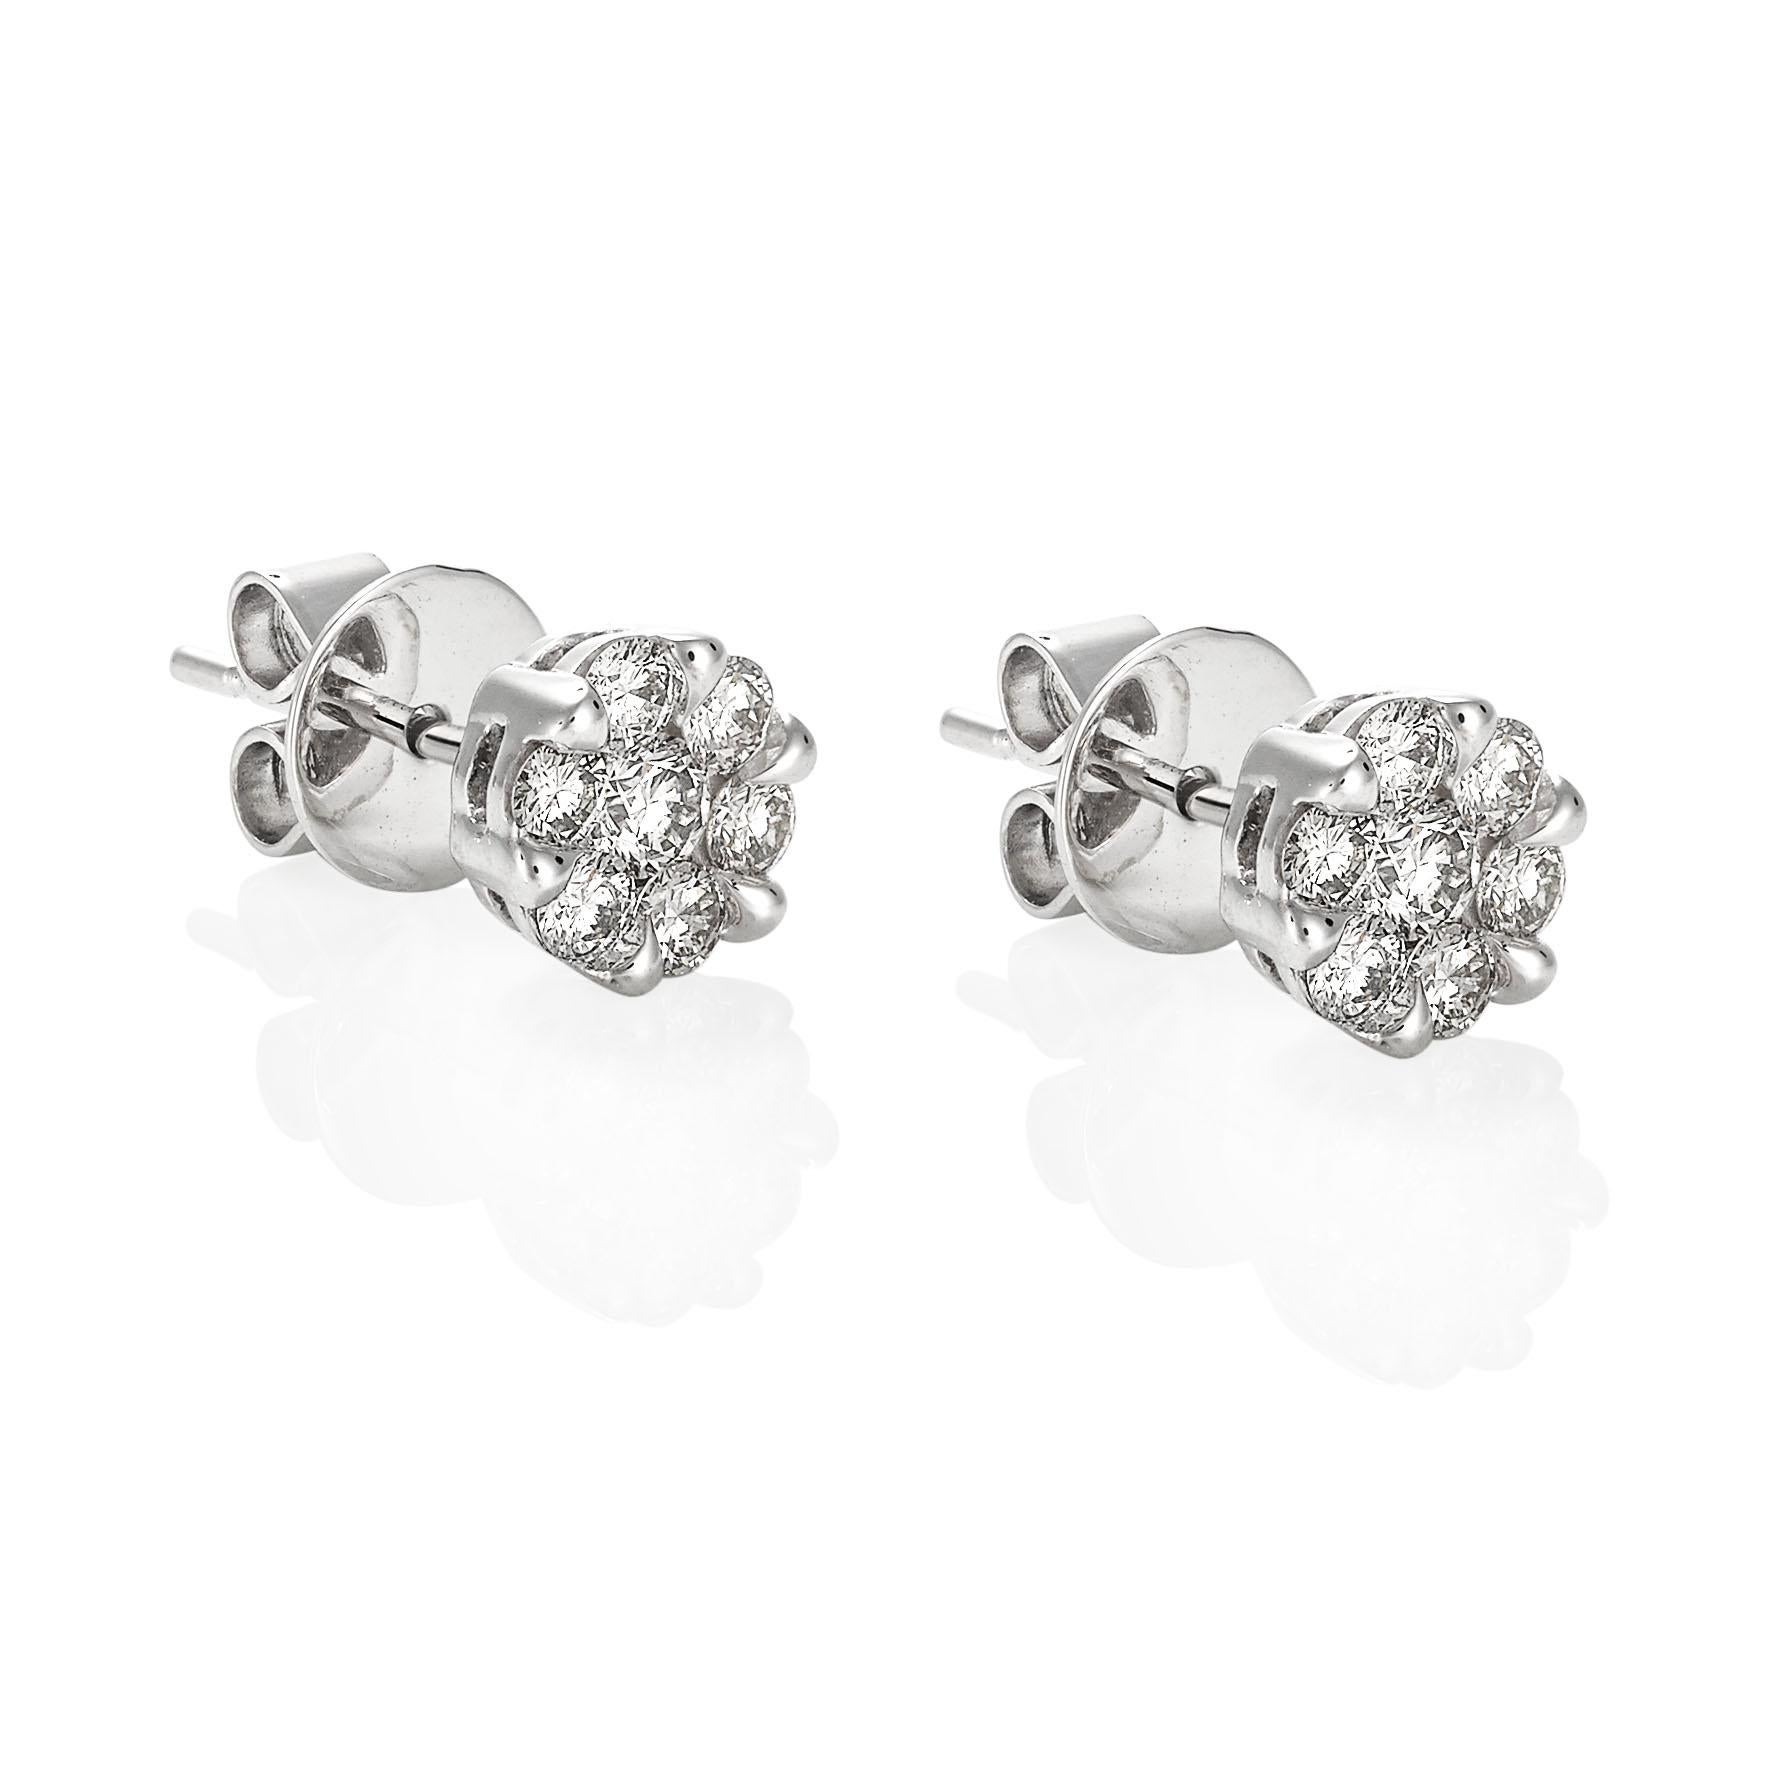 Giulians 18 karat white gold diamond set stud earrings.  Each earring features 6 round brilliant cut diamonds in prong settings and one larger round brilliant cut diamond set in the centre.  The total diamond weight is 14=0.90ct (G-H/VS-Si).  The